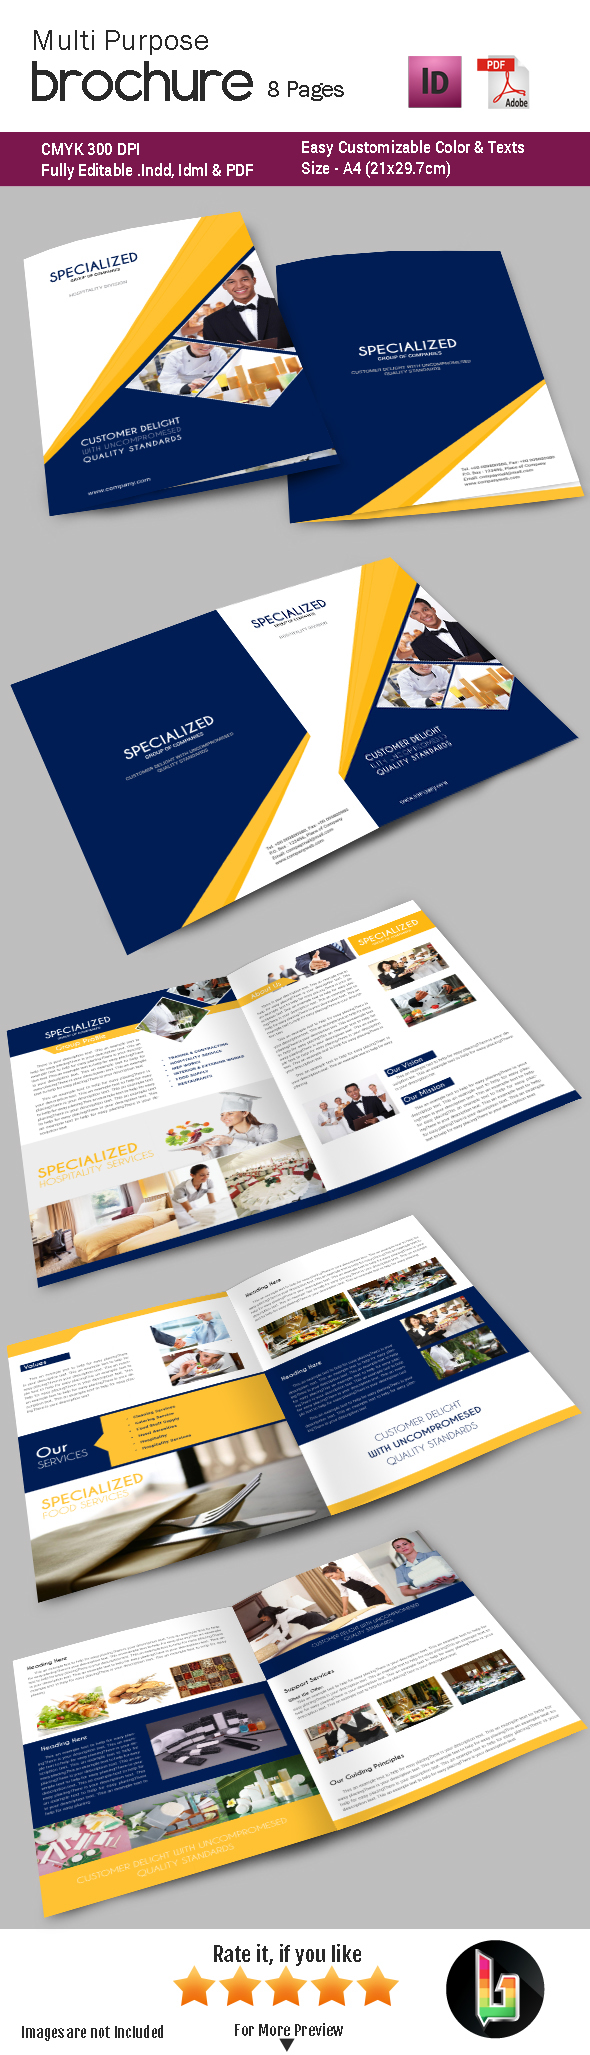 Multi Purpose Brochure - 8 Pages